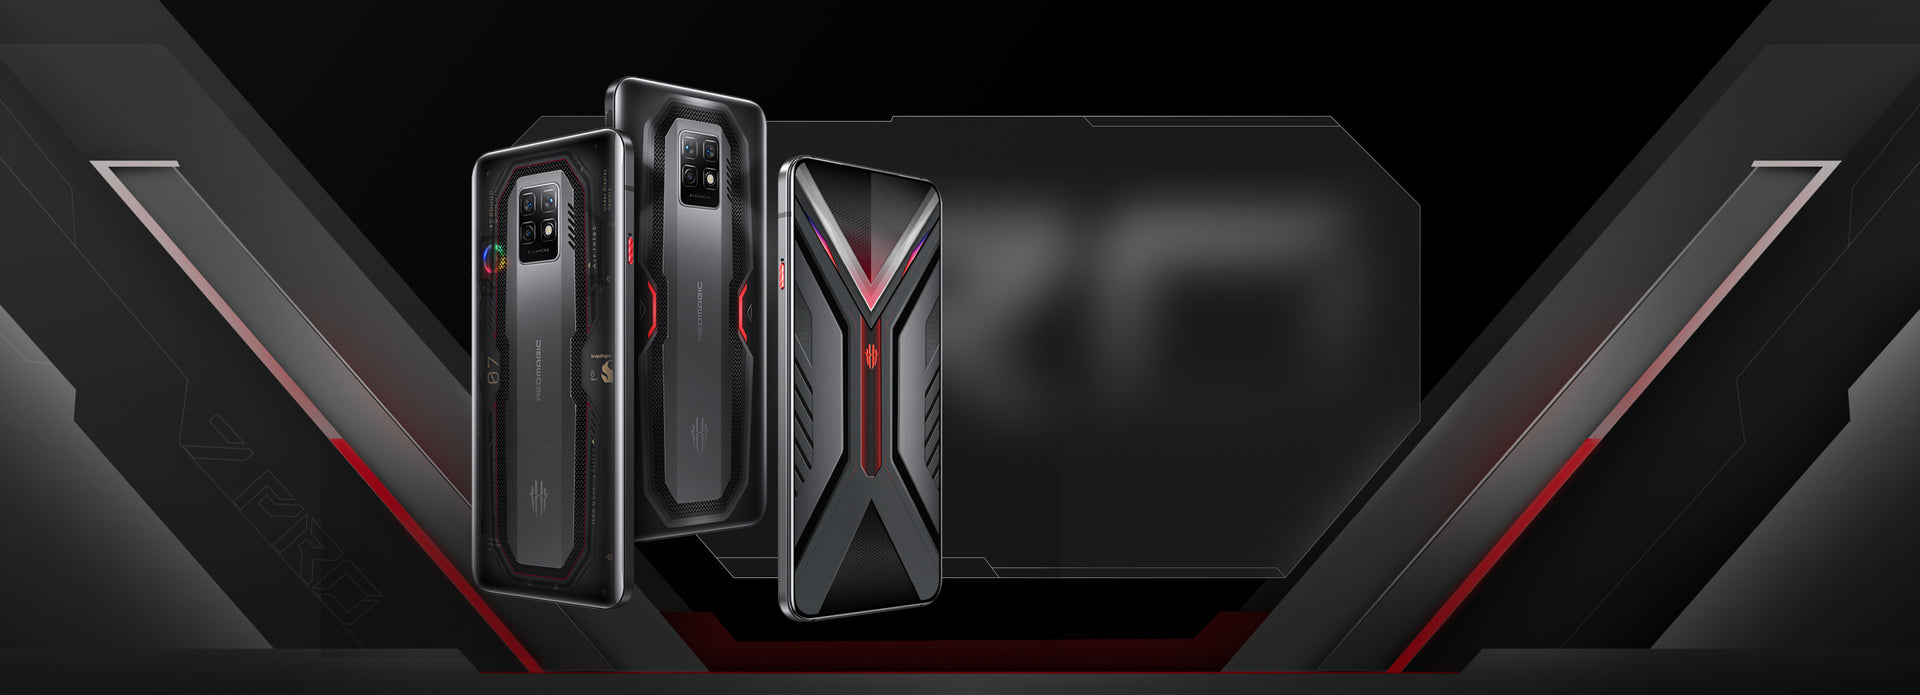 REDMAGIC 7 Pro Gaming Smartphone - Product Page - REDMAGIC (US and 